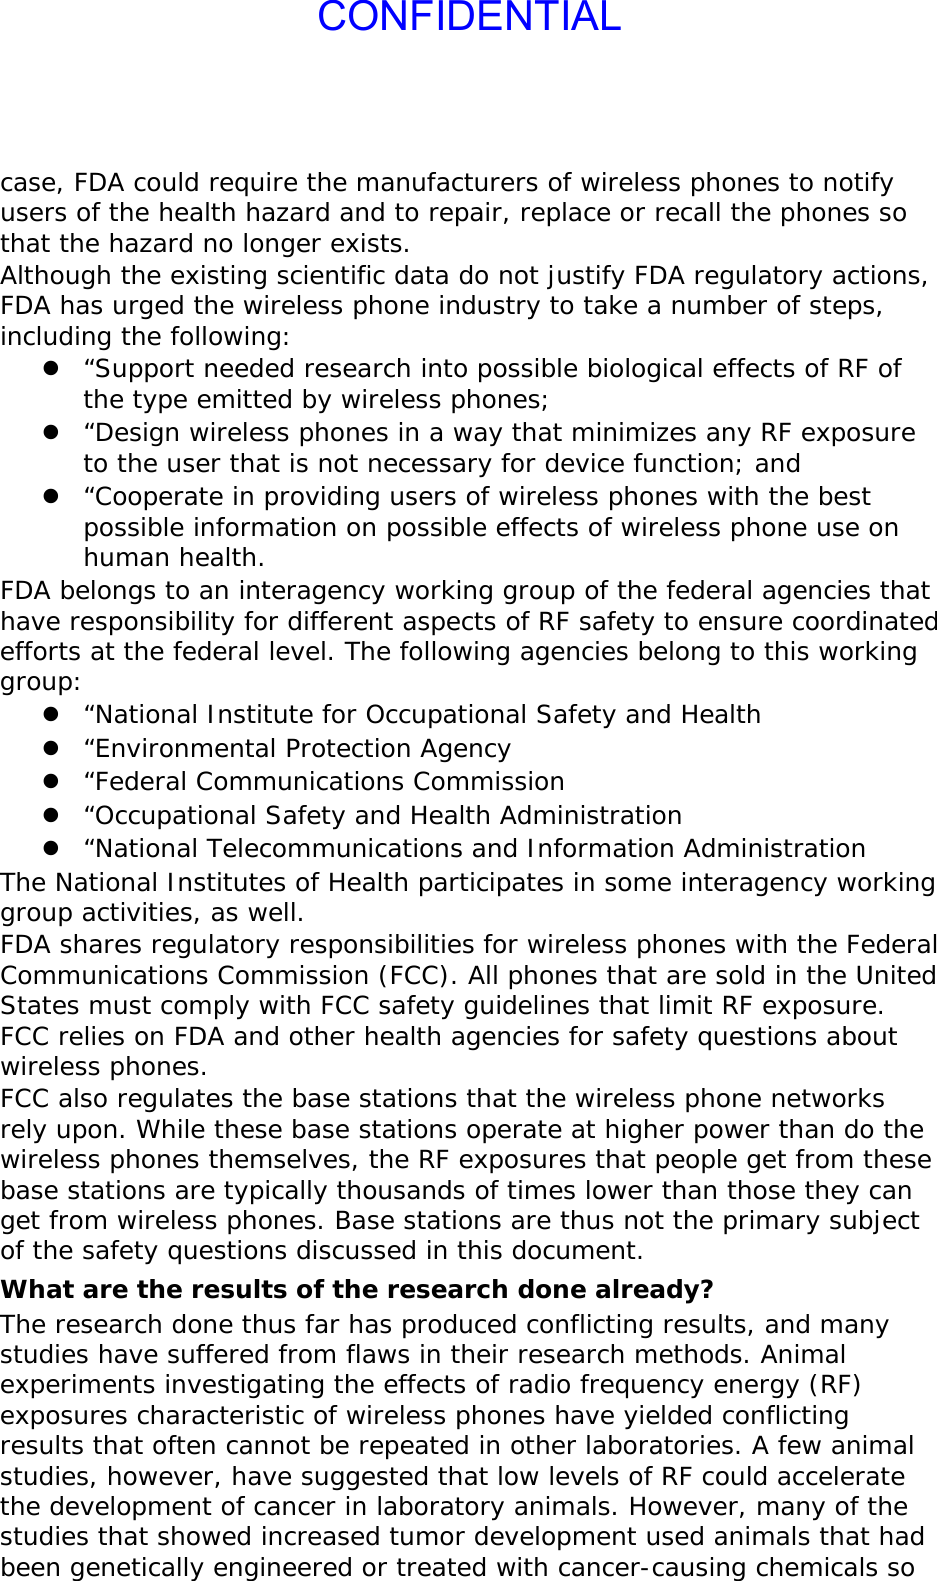 CONFIDENTIALcase, FDA could require the manufacturers of wireless phones to notify users of the health hazard and to repair, replace or recall the phones so that the hazard no longer exists. Although the existing scientific data do not justify FDA regulatory actions, FDA has urged the wireless phone industry to take a number of steps, including the following: z “Support needed research into possible biological effects of RF of the type emitted by wireless phones; z “Design wireless phones in a way that minimizes any RF exposure to the user that is not necessary for device function; and z “Cooperate in providing users of wireless phones with the best possible information on possible effects of wireless phone use on human health. FDA belongs to an interagency working group of the federal agencies that have responsibility for different aspects of RF safety to ensure coordinated efforts at the federal level. The following agencies belong to this working group: z “National Institute for Occupational Safety and Health z “Environmental Protection Agency z “Federal Communications Commission z “Occupational Safety and Health Administration z “National Telecommunications and Information Administration The National Institutes of Health participates in some interagency working group activities, as well. FDA shares regulatory responsibilities for wireless phones with the Federal Communications Commission (FCC). All phones that are sold in the United States must comply with FCC safety guidelines that limit RF exposure. FCC relies on FDA and other health agencies for safety questions about wireless phones. FCC also regulates the base stations that the wireless phone networks rely upon. While these base stations operate at higher power than do the wireless phones themselves, the RF exposures that people get from these base stations are typically thousands of times lower than those they can get from wireless phones. Base stations are thus not the primary subject of the safety questions discussed in this document. What are the results of the research done already? The research done thus far has produced conflicting results, and many studies have suffered from flaws in their research methods. Animal experiments investigating the effects of radio frequency energy (RF) exposures characteristic of wireless phones have yielded conflicting results that often cannot be repeated in other laboratories. A few animal studies, however, have suggested that low levels of RF could accelerate the development of cancer in laboratory animals. However, many of the studies that showed increased tumor development used animals that had been genetically engineered or treated with cancer-causing chemicals so 